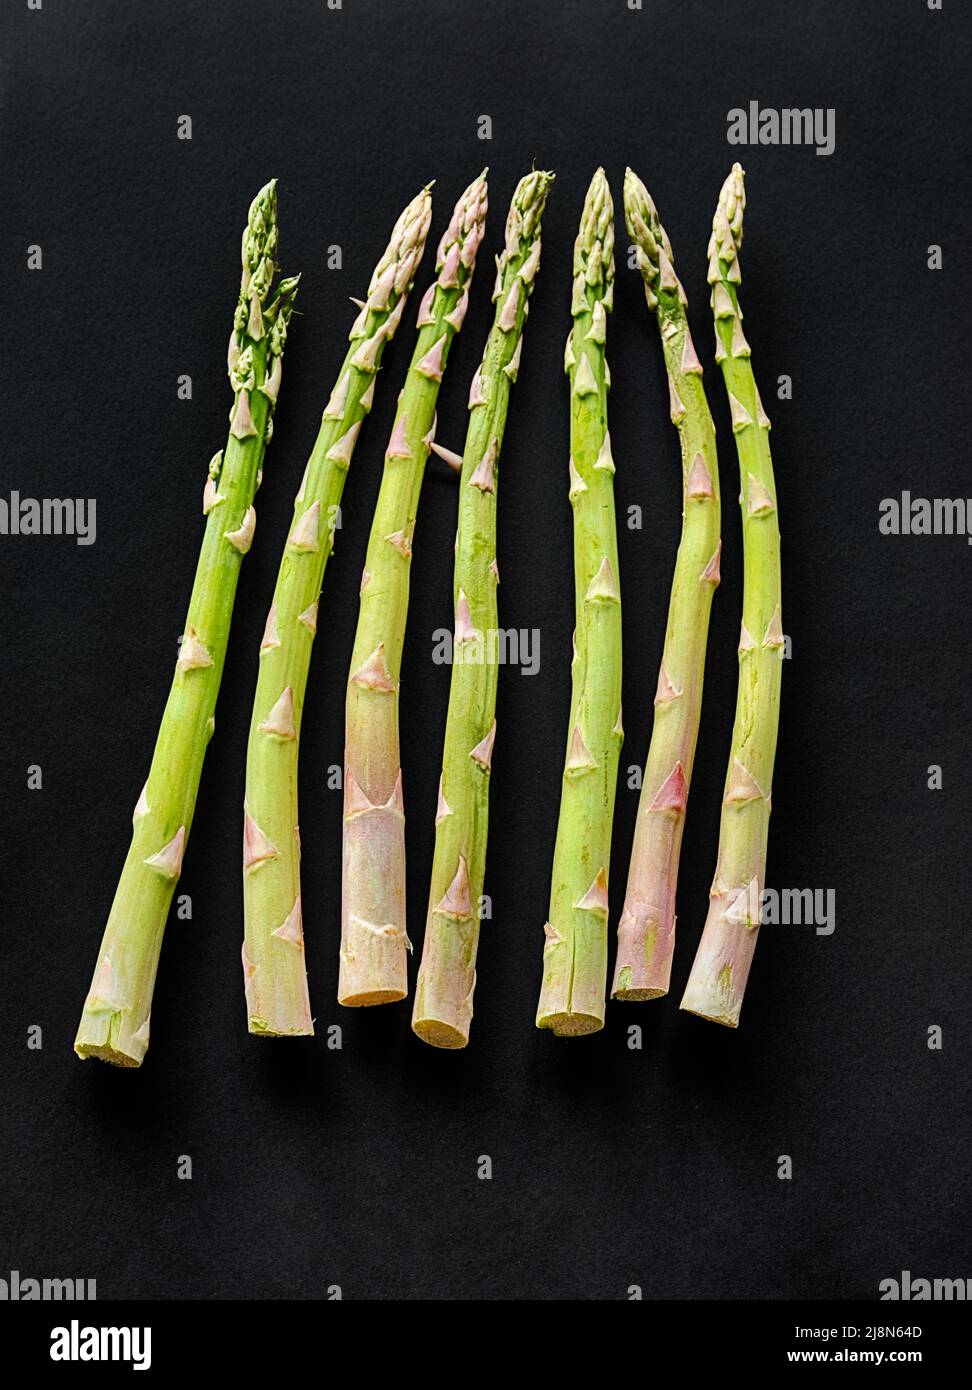 Seven asparagus spears are laid out against a black background. Stock Photo